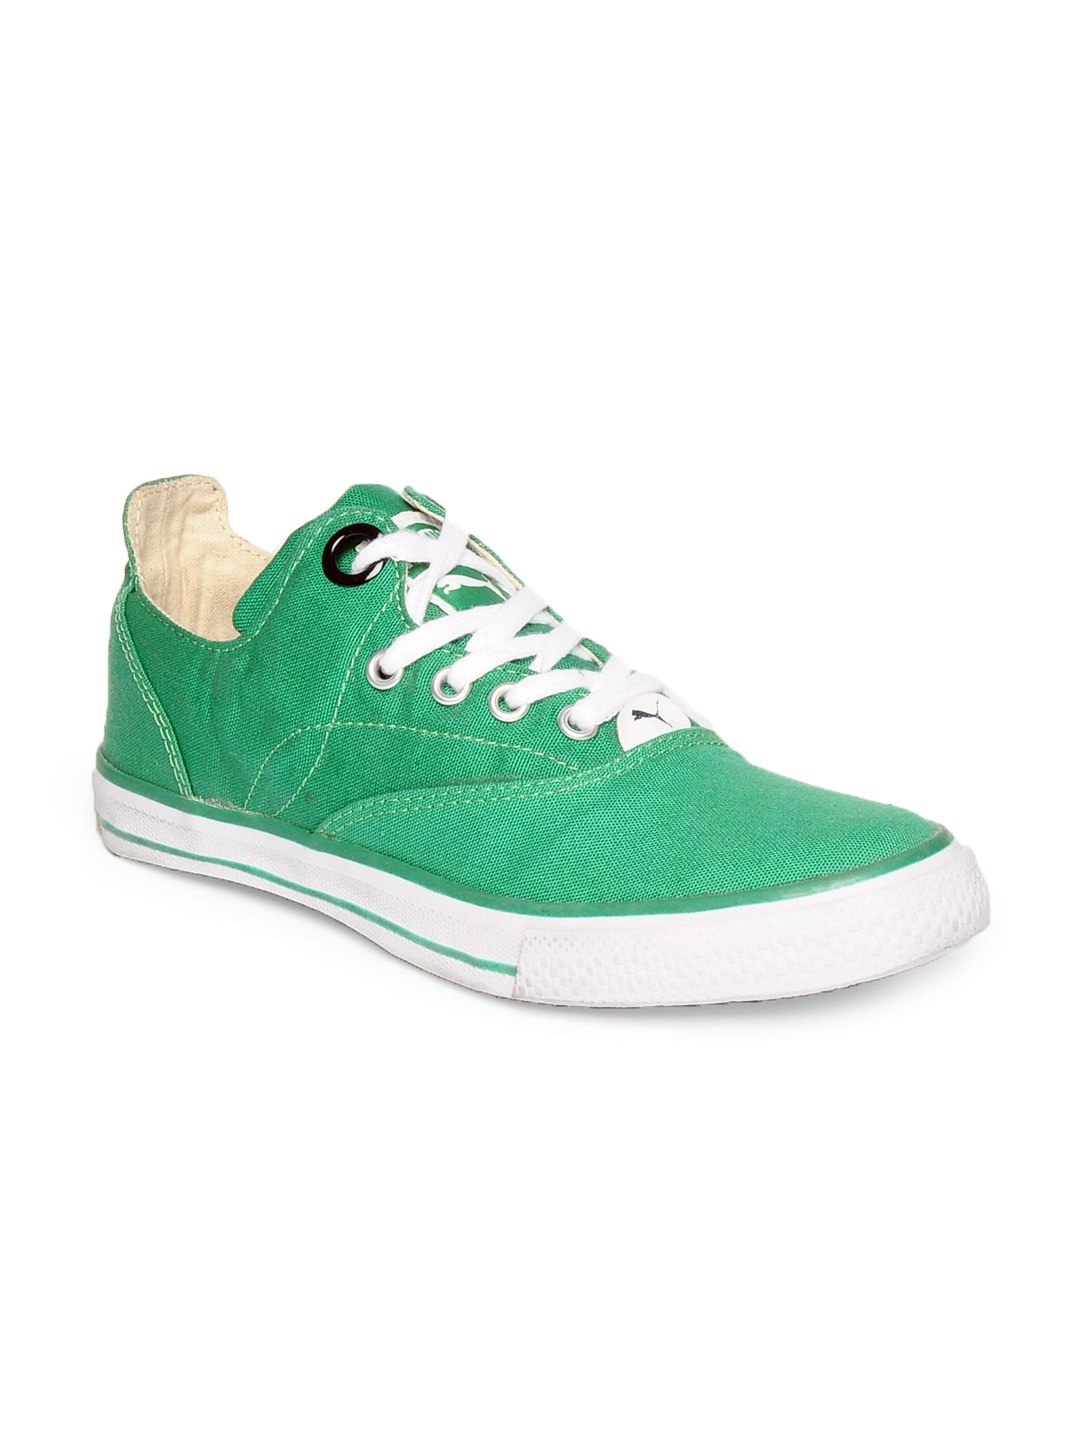 Puma Unisex Green Limnos Casual Shoes